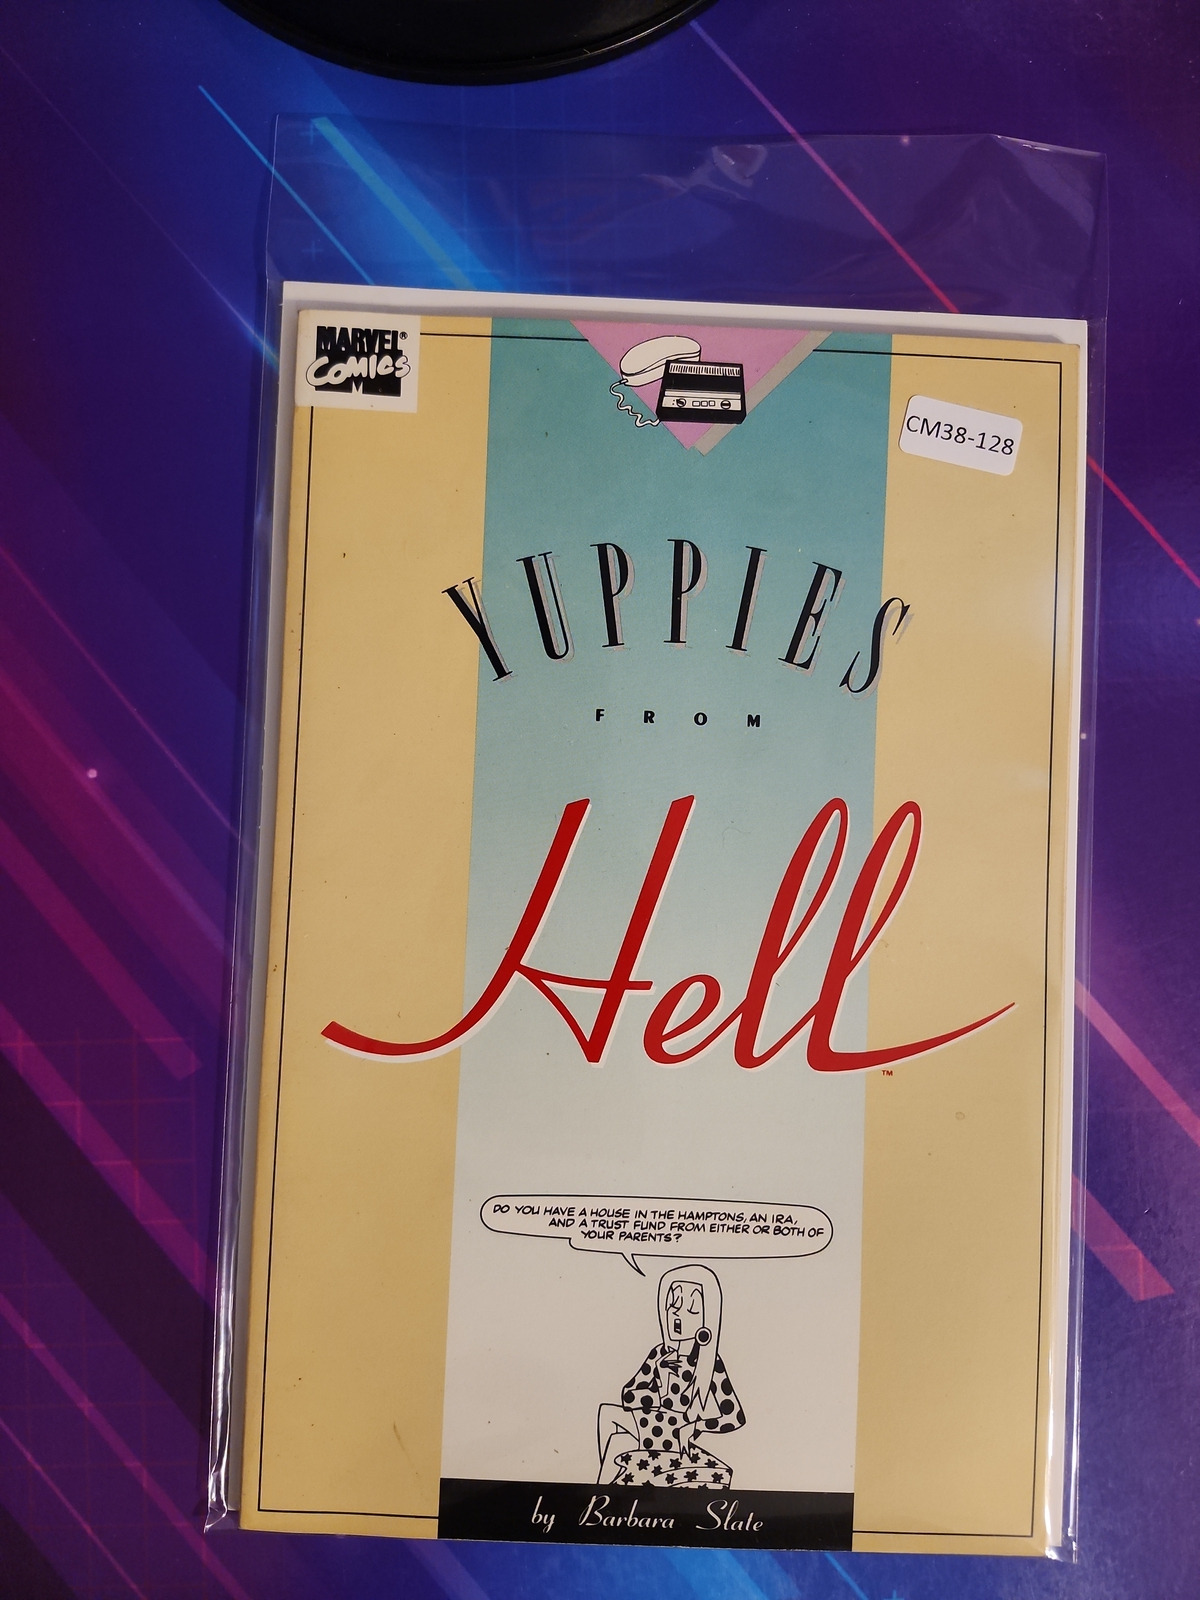 YUPPIES FROM HELL #1 ONE-SHOT HIGH GRADE MARVEL COMIC BOOK CM38-128